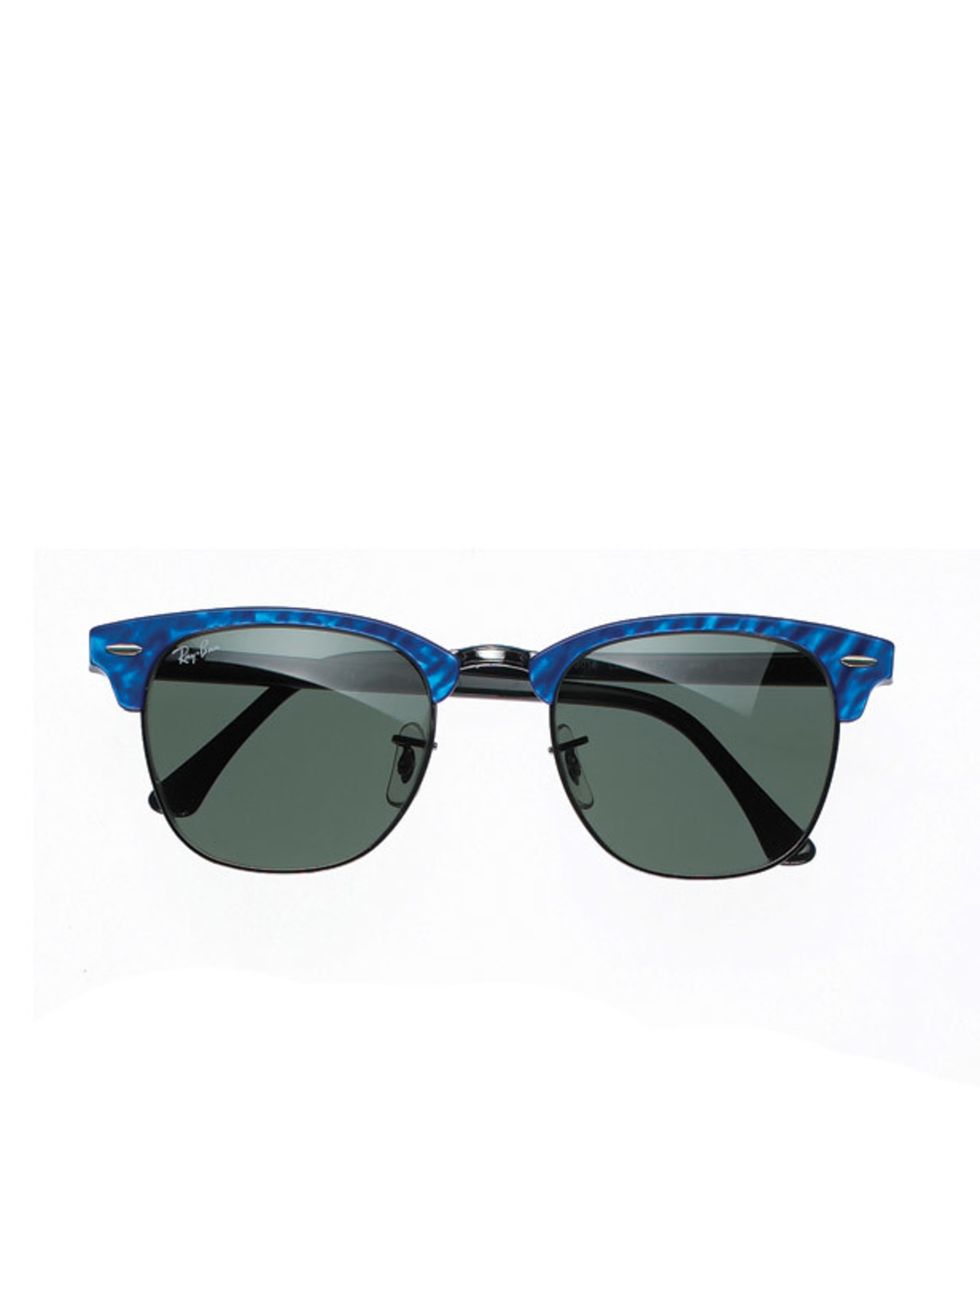 <p>Blue clubmasters, £120, by Ray Ban at Sunglass Hut (0844 264 0860)</p>